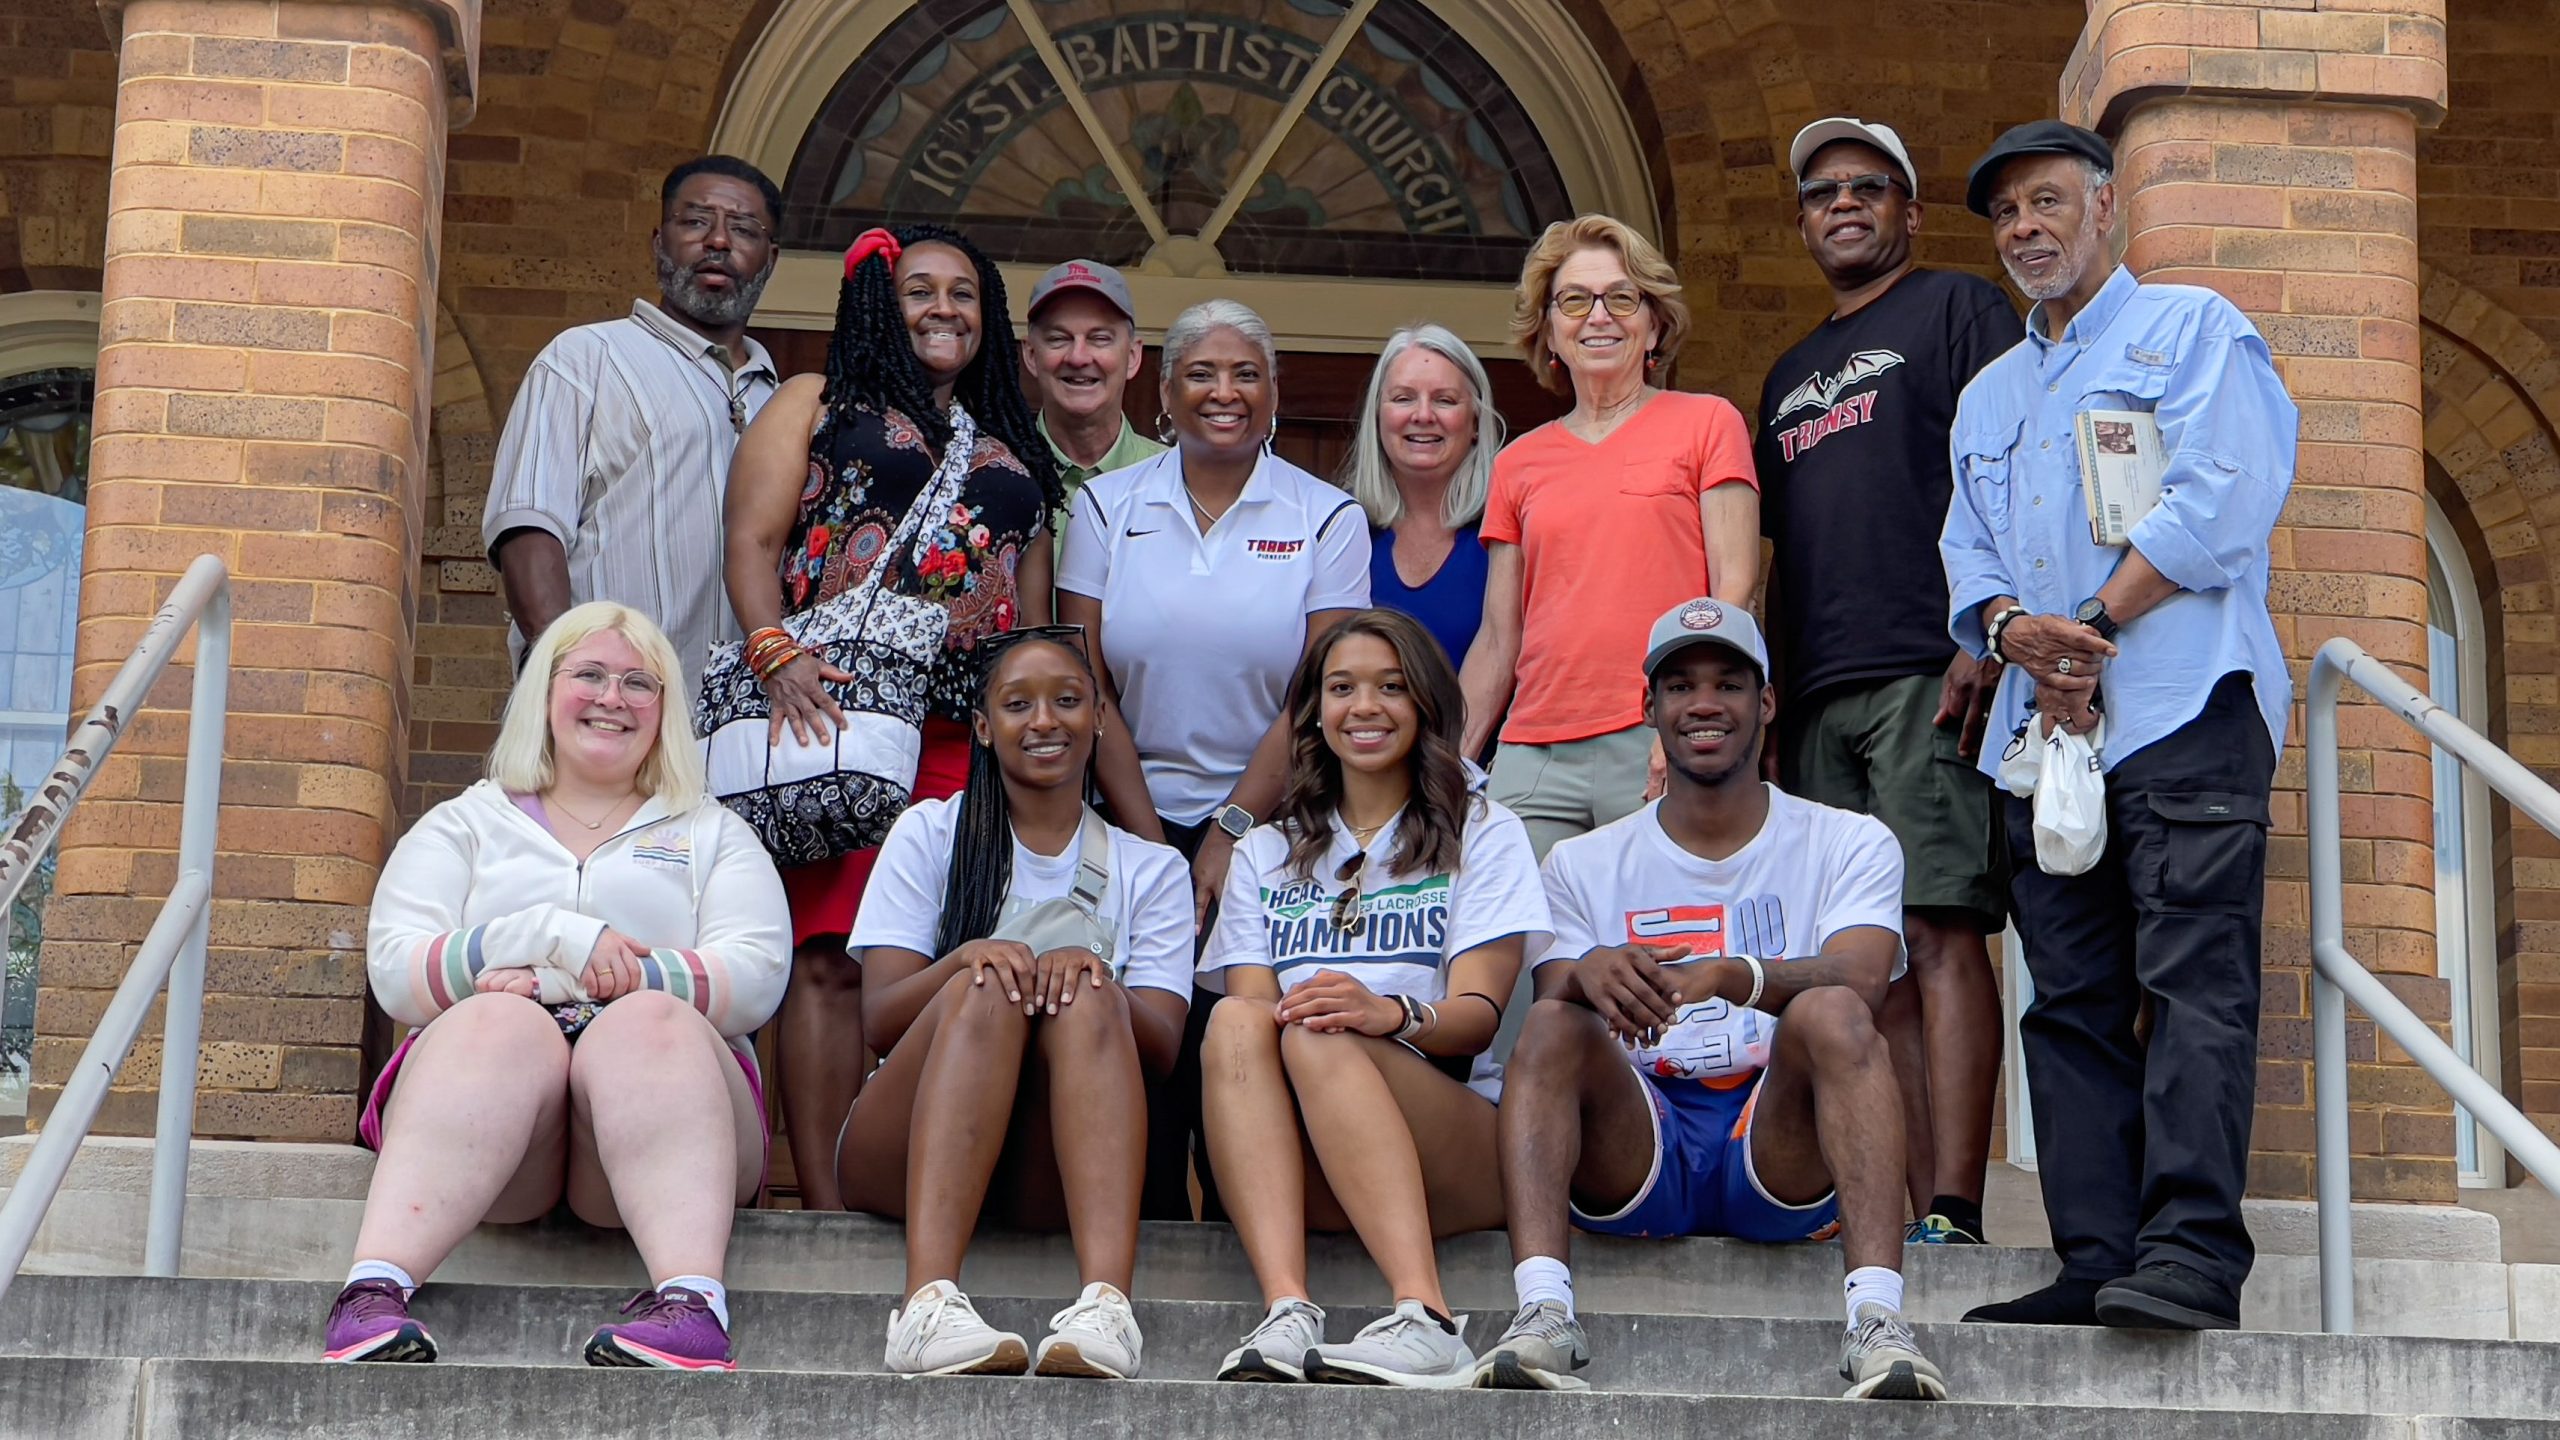 Participants experience first Transylvania Civil Rights tour as ‘moving,’ ‘transformative’